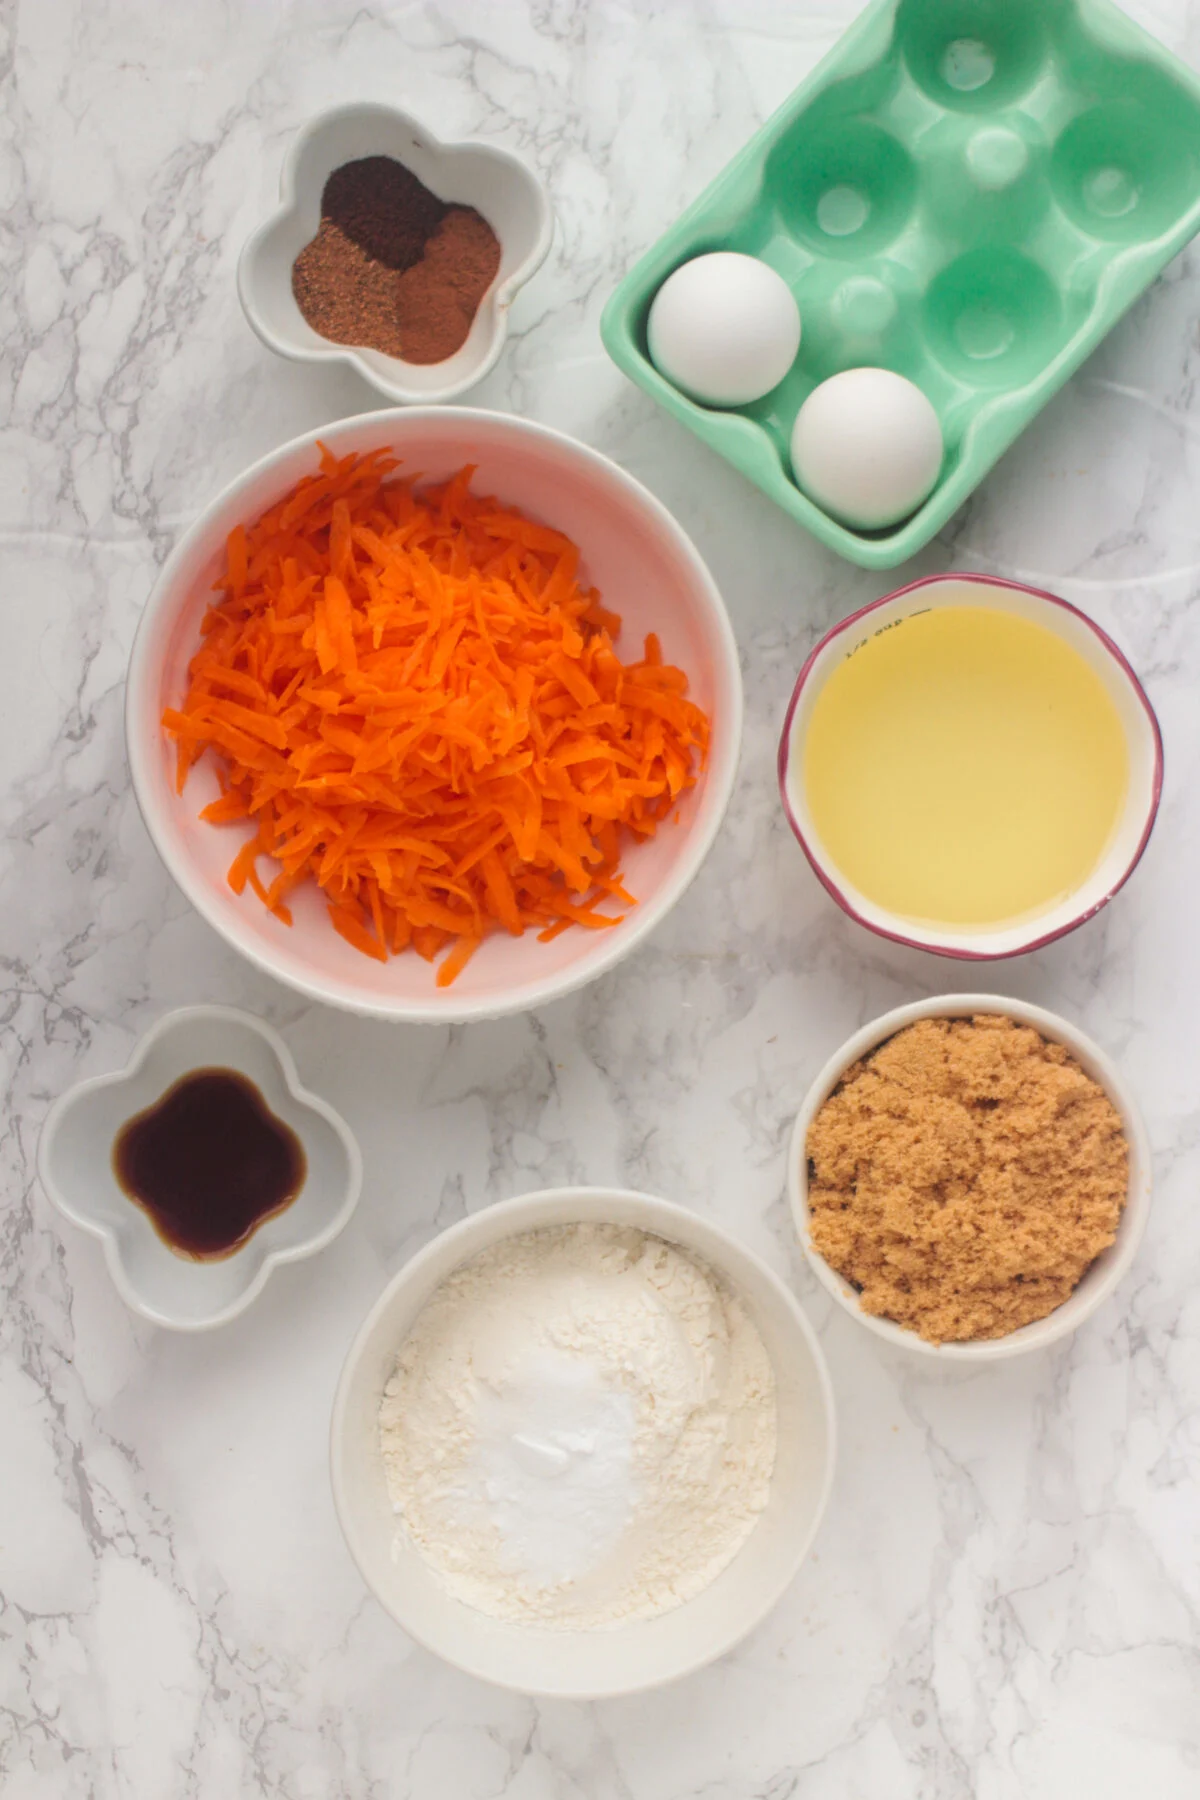 Ingredients for carrot cake cupcakes